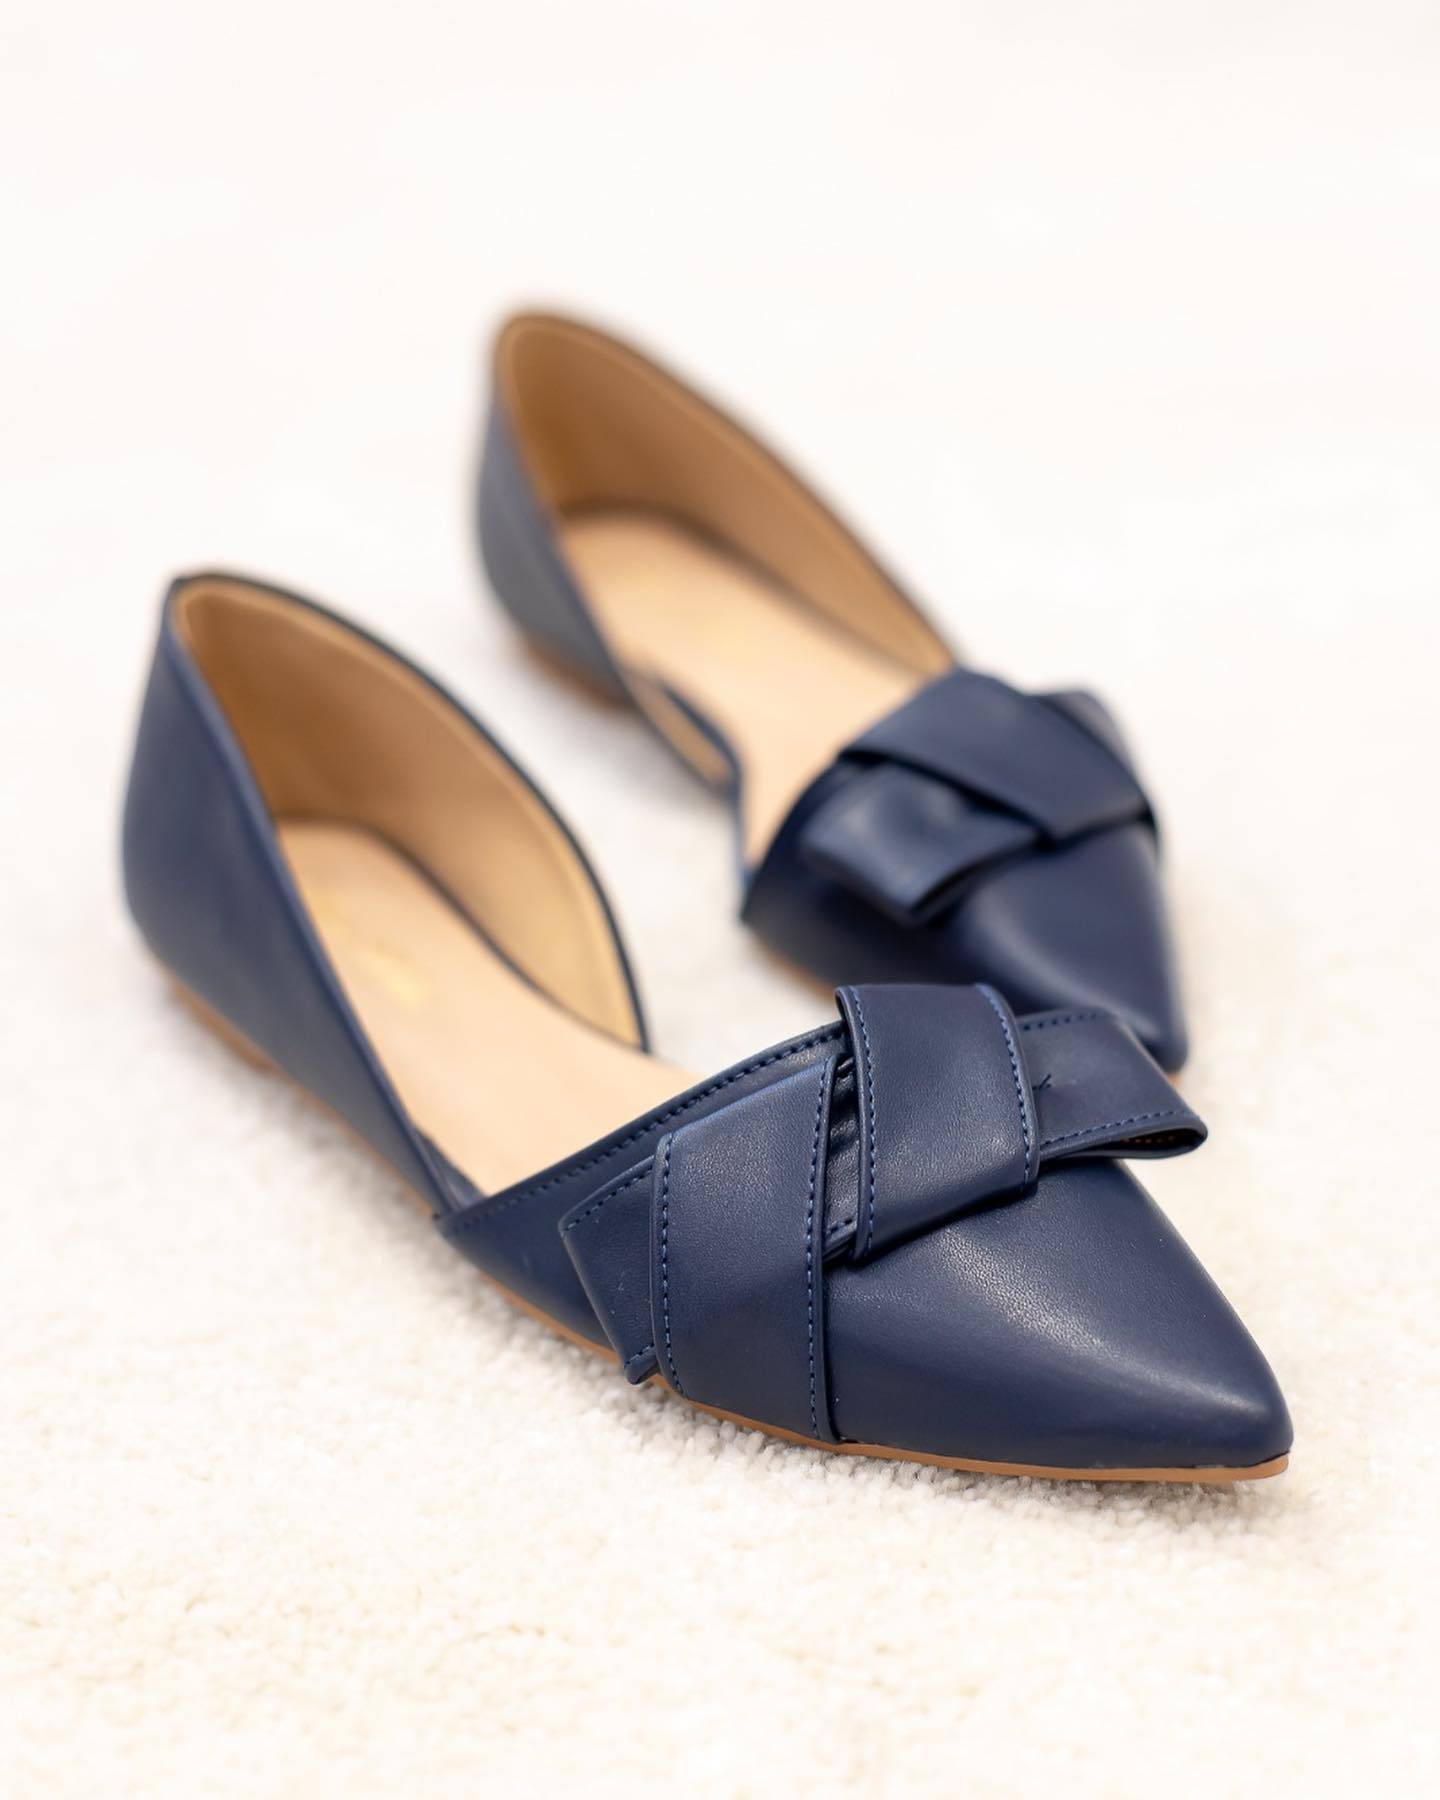 Women's Soft Leather Bow Flats